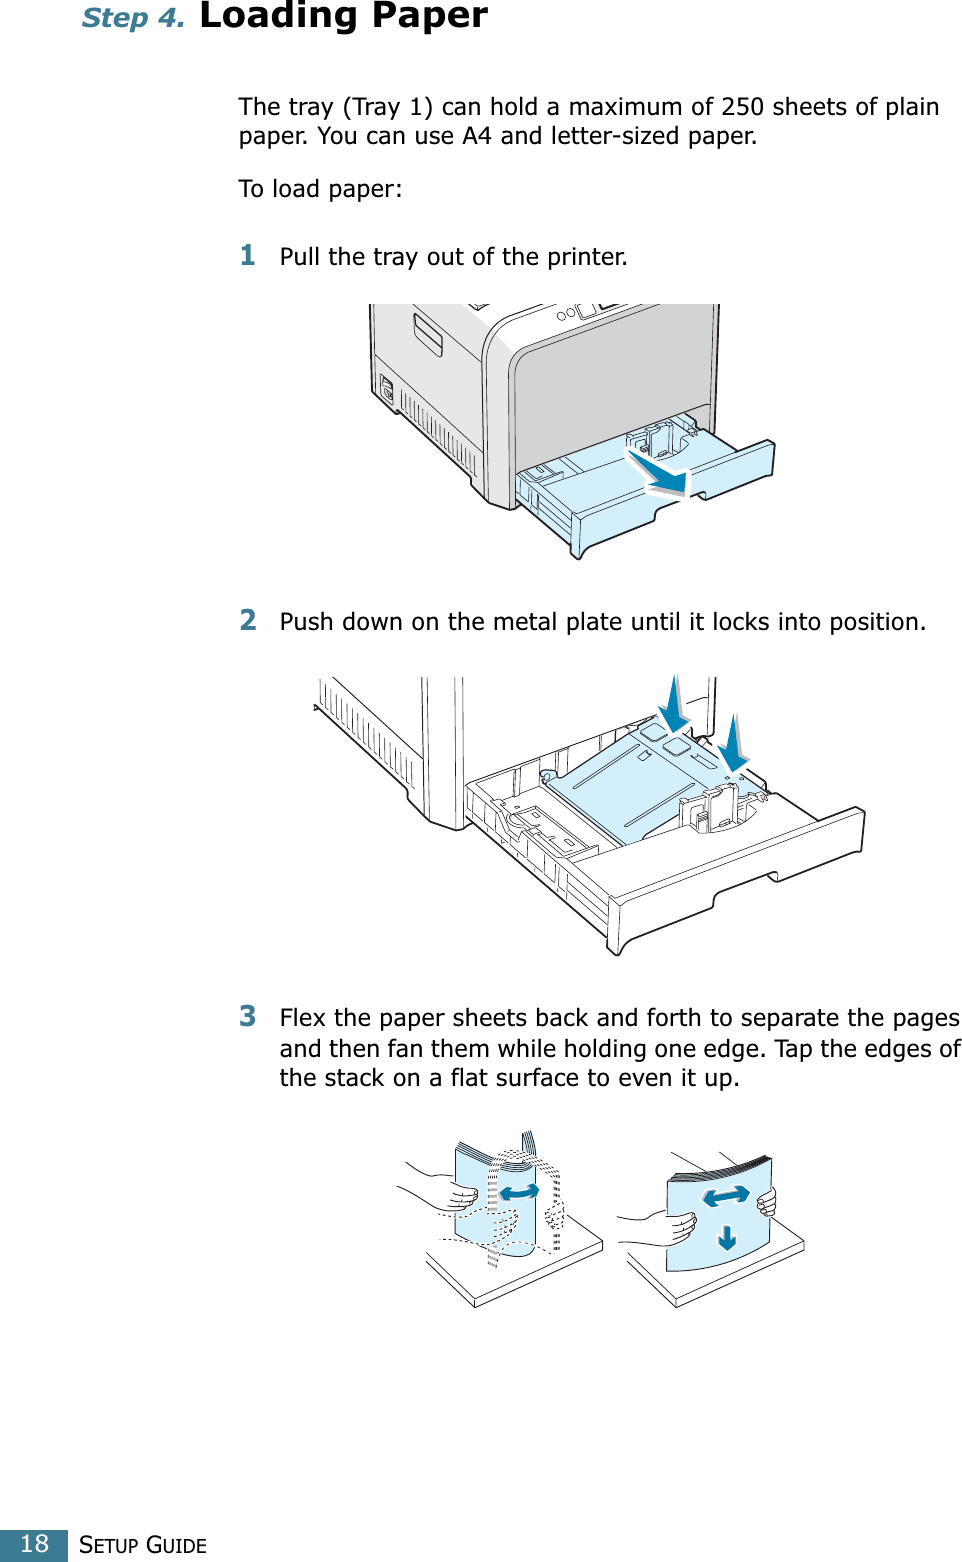 SETUP GUIDE18Step 4. Loading PaperThe tray (Tray 1) can hold a maximum of 250 sheets of plain paper. You can use A4 and letter-sized paper.To load paper:1Pull the tray out of the printer.2Push down on the metal plate until it locks into position.3Flex the paper sheets back and forth to separate the pages and then fan them while holding one edge. Tap the edges of the stack on a flat surface to even it up.